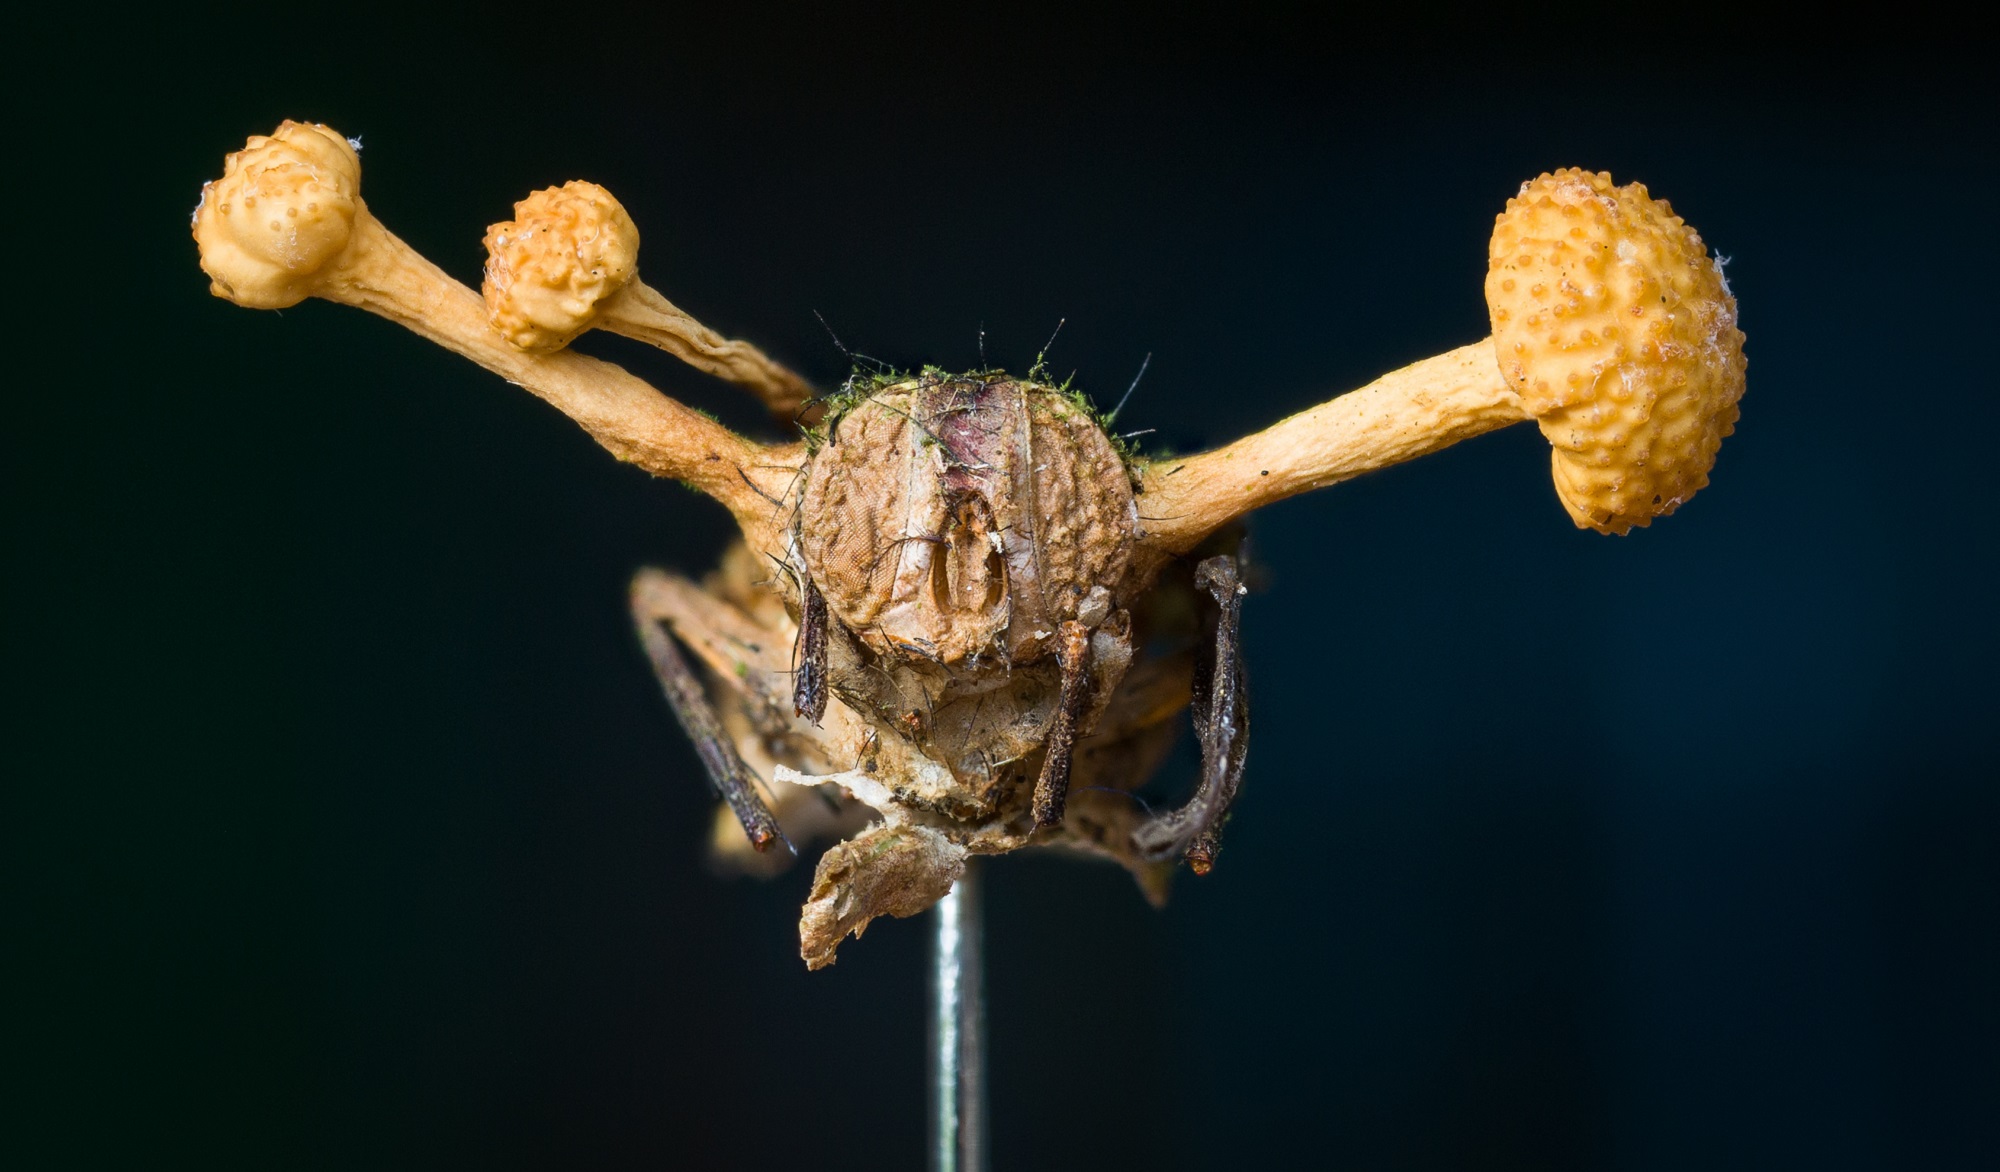 Fly with cordyceps zombie fungus growing out of its head on black background